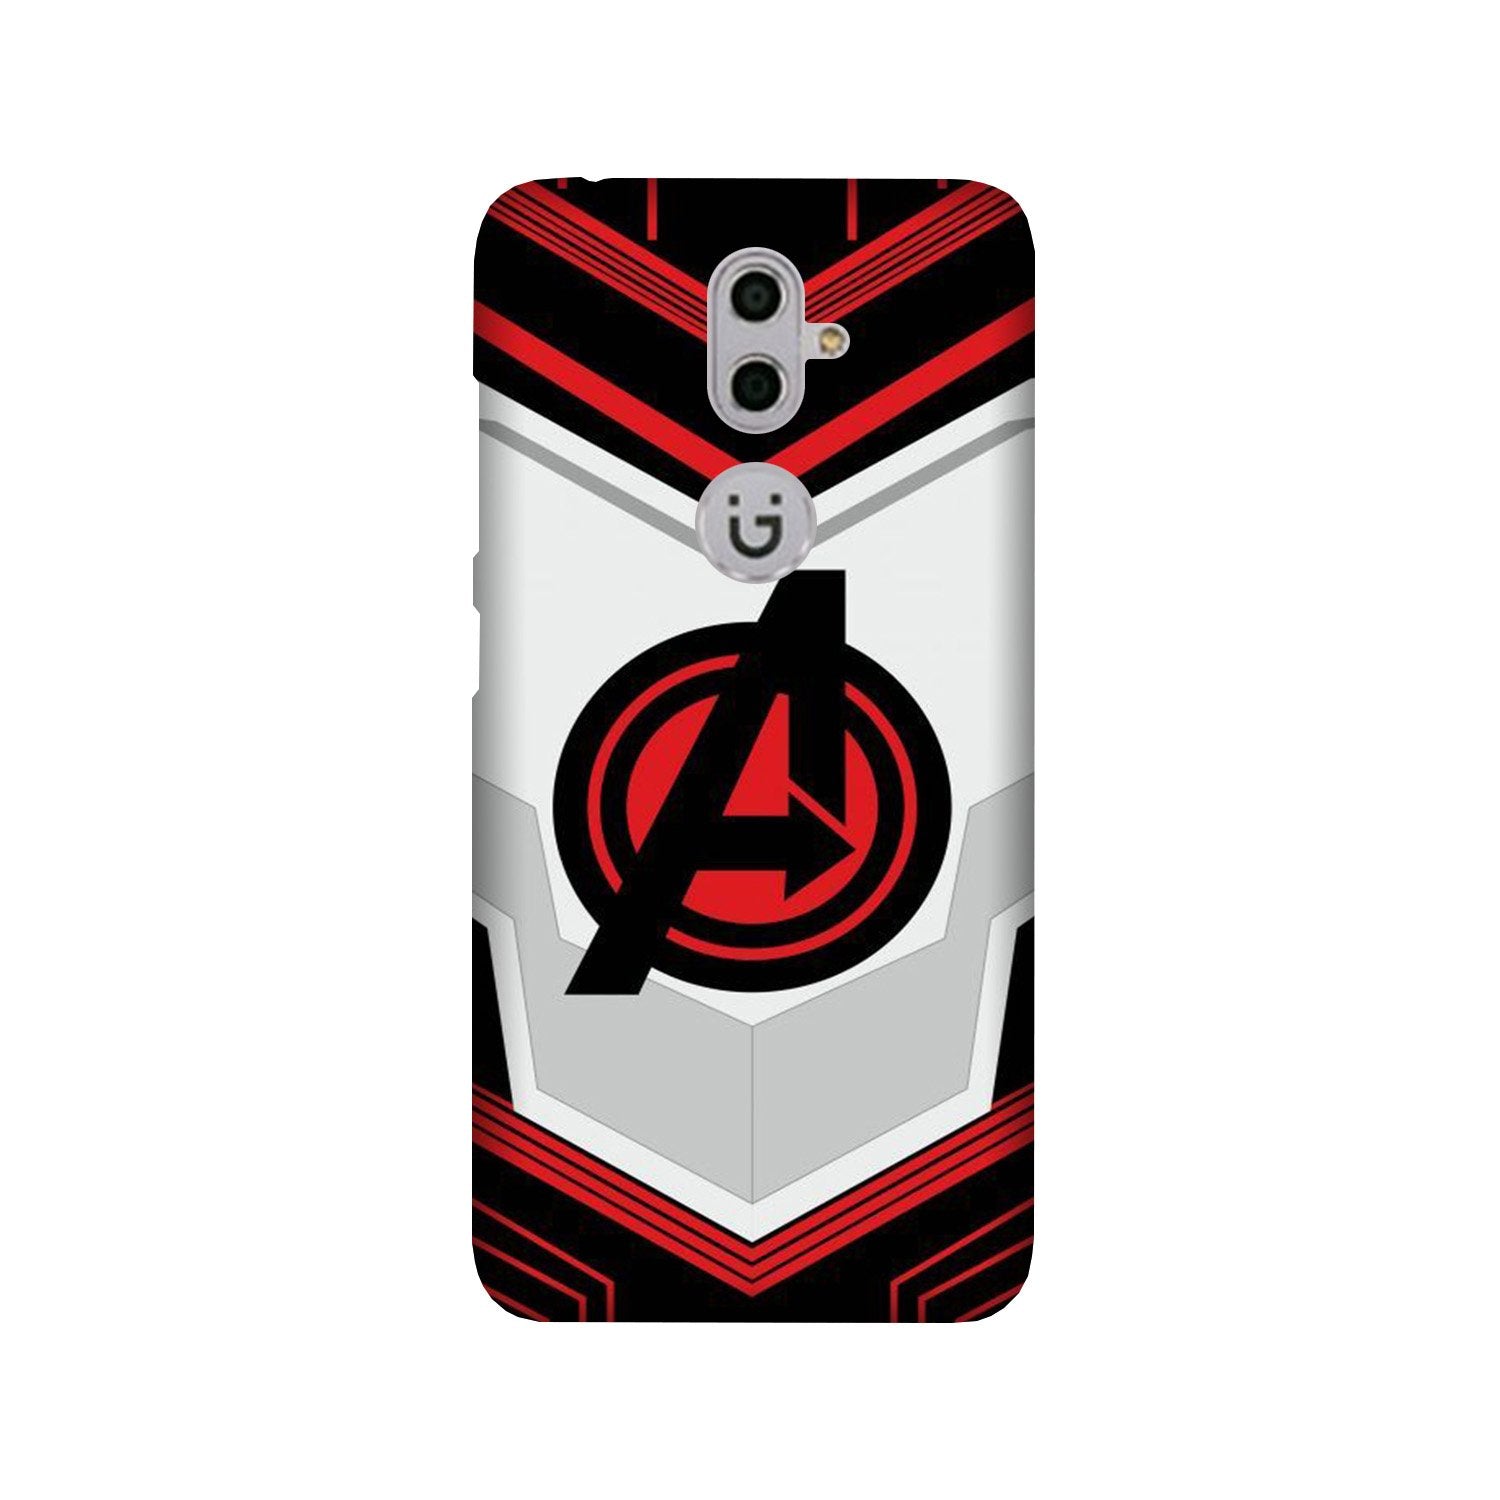 Avengers2 Case for Gionee S9 (Design No. 255)